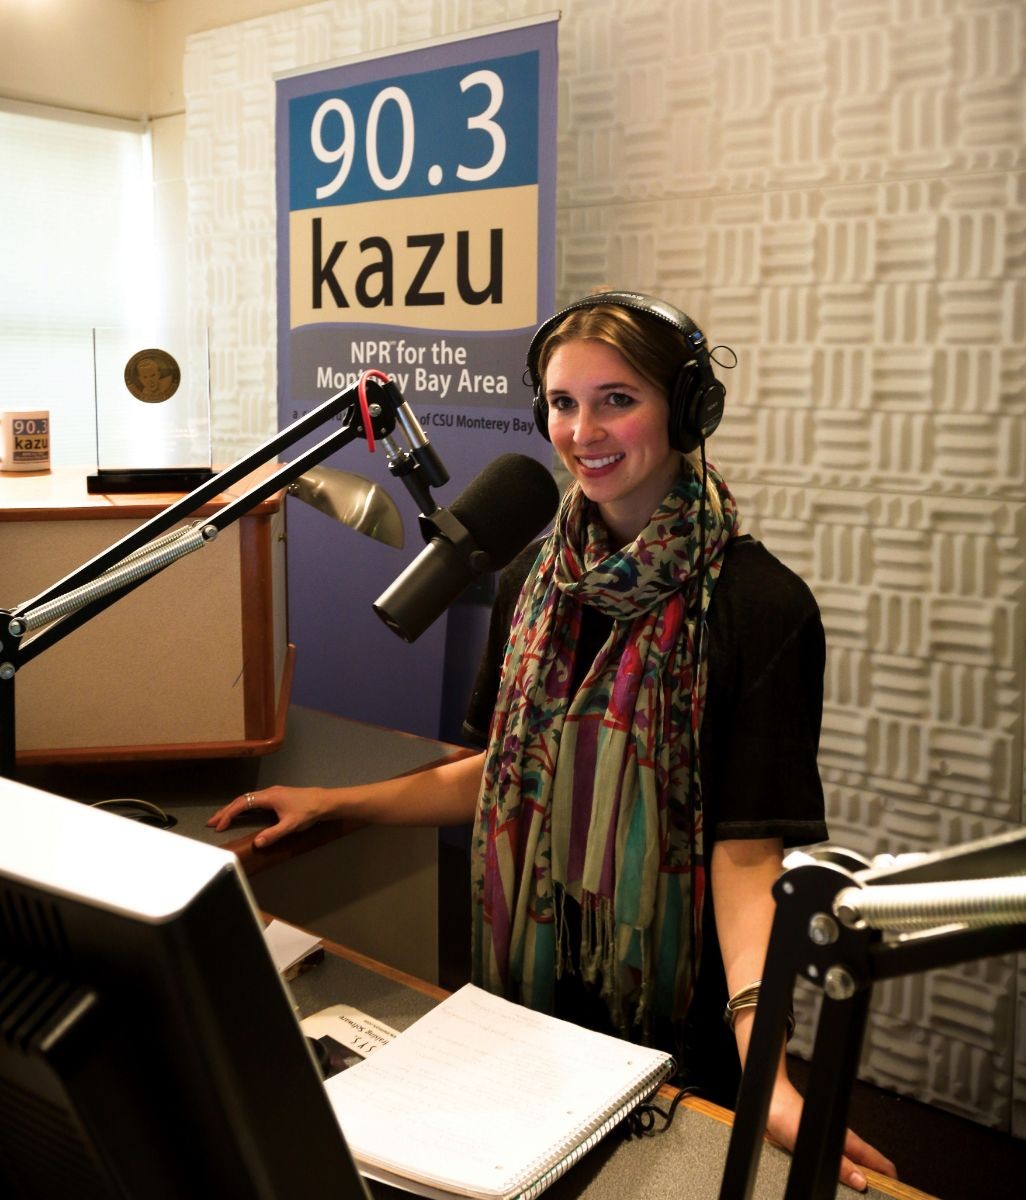 Erika Mahoney in the broadcast booth at 90.3 KAZU.